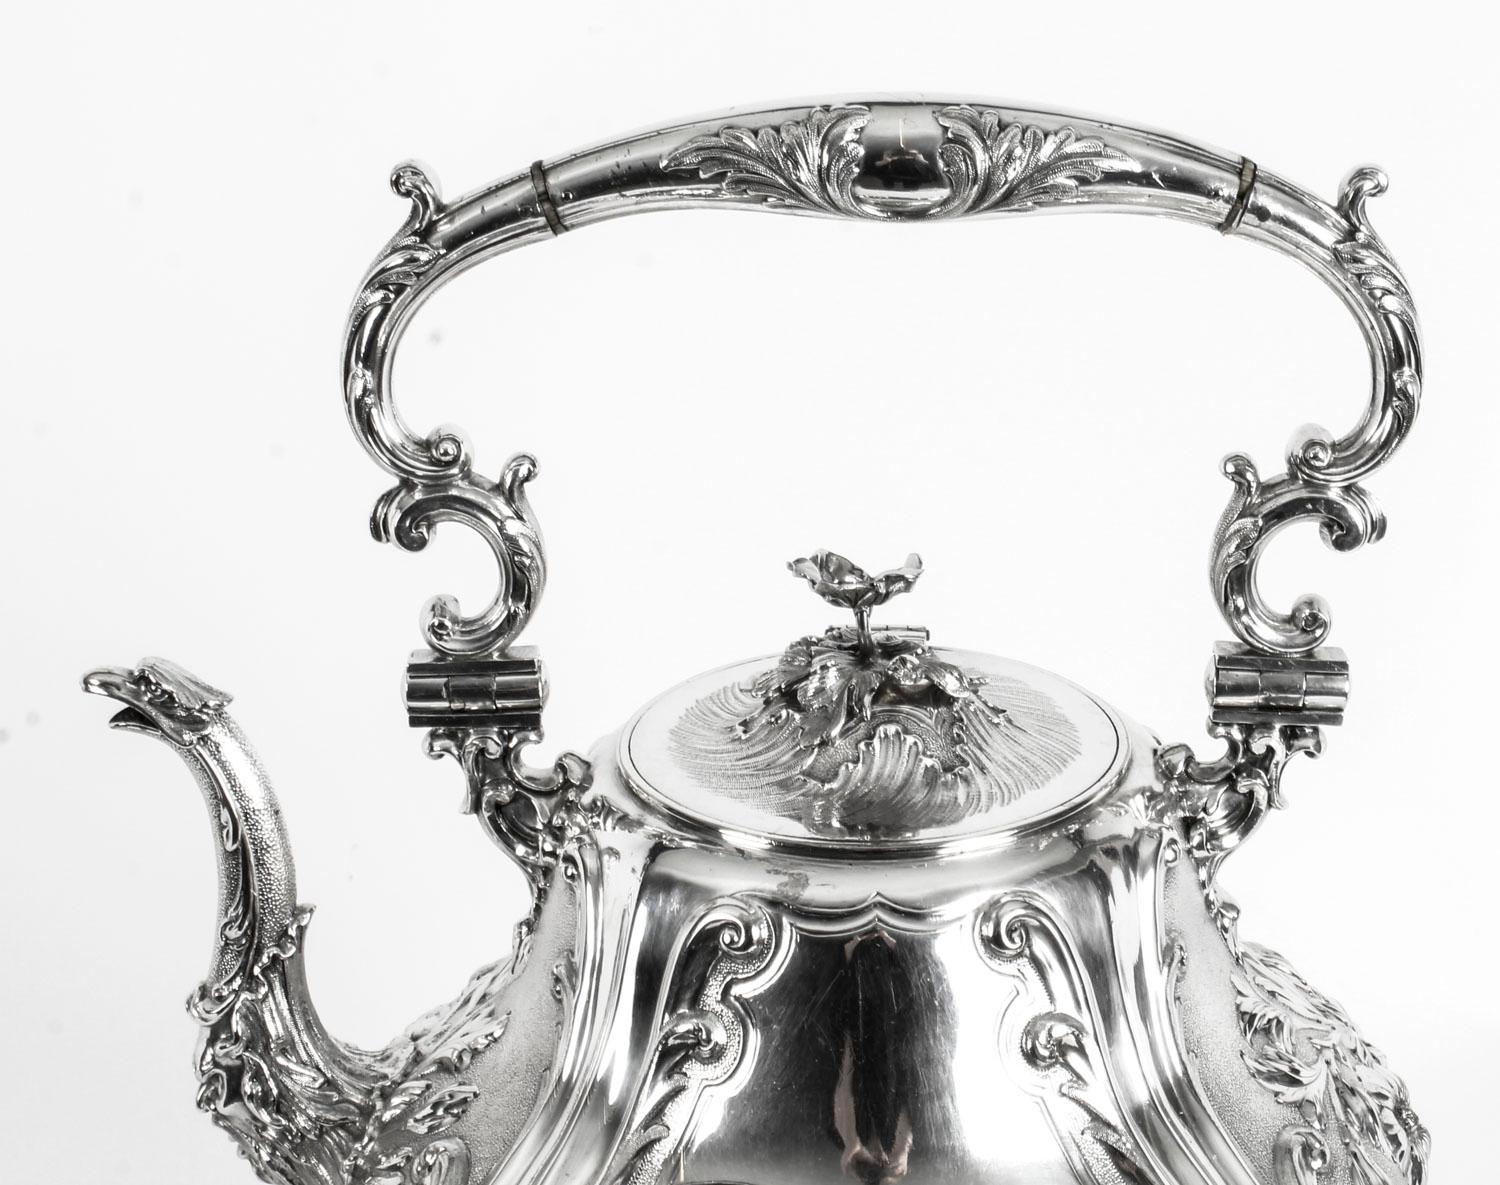 Antique Silver Plate Spirit Kettle on Stand by Elkington, 19th Century 3